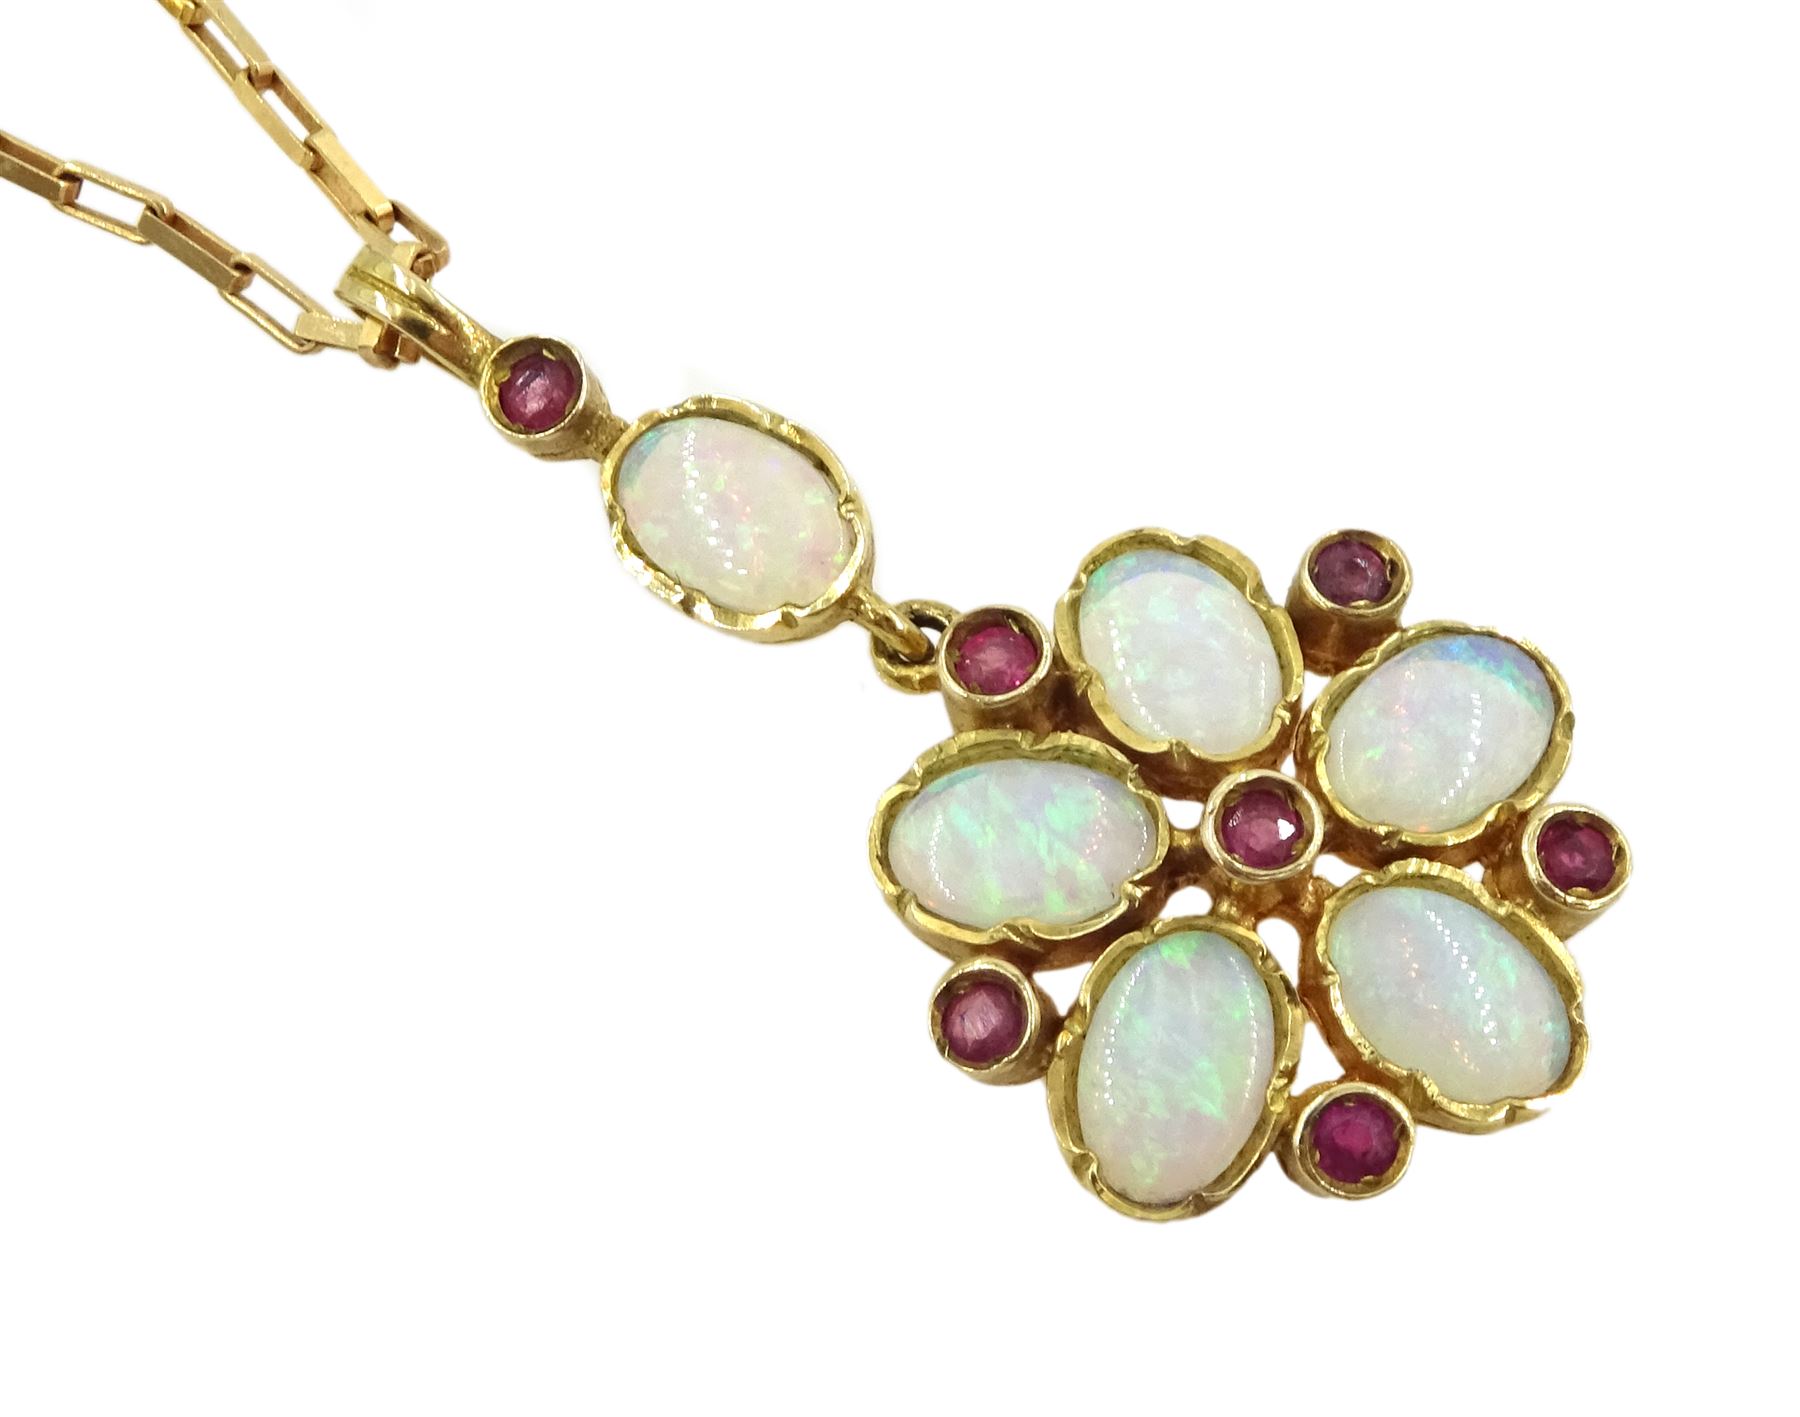 9ct gold opal and ruby flower pendant necklace - Image 2 of 3